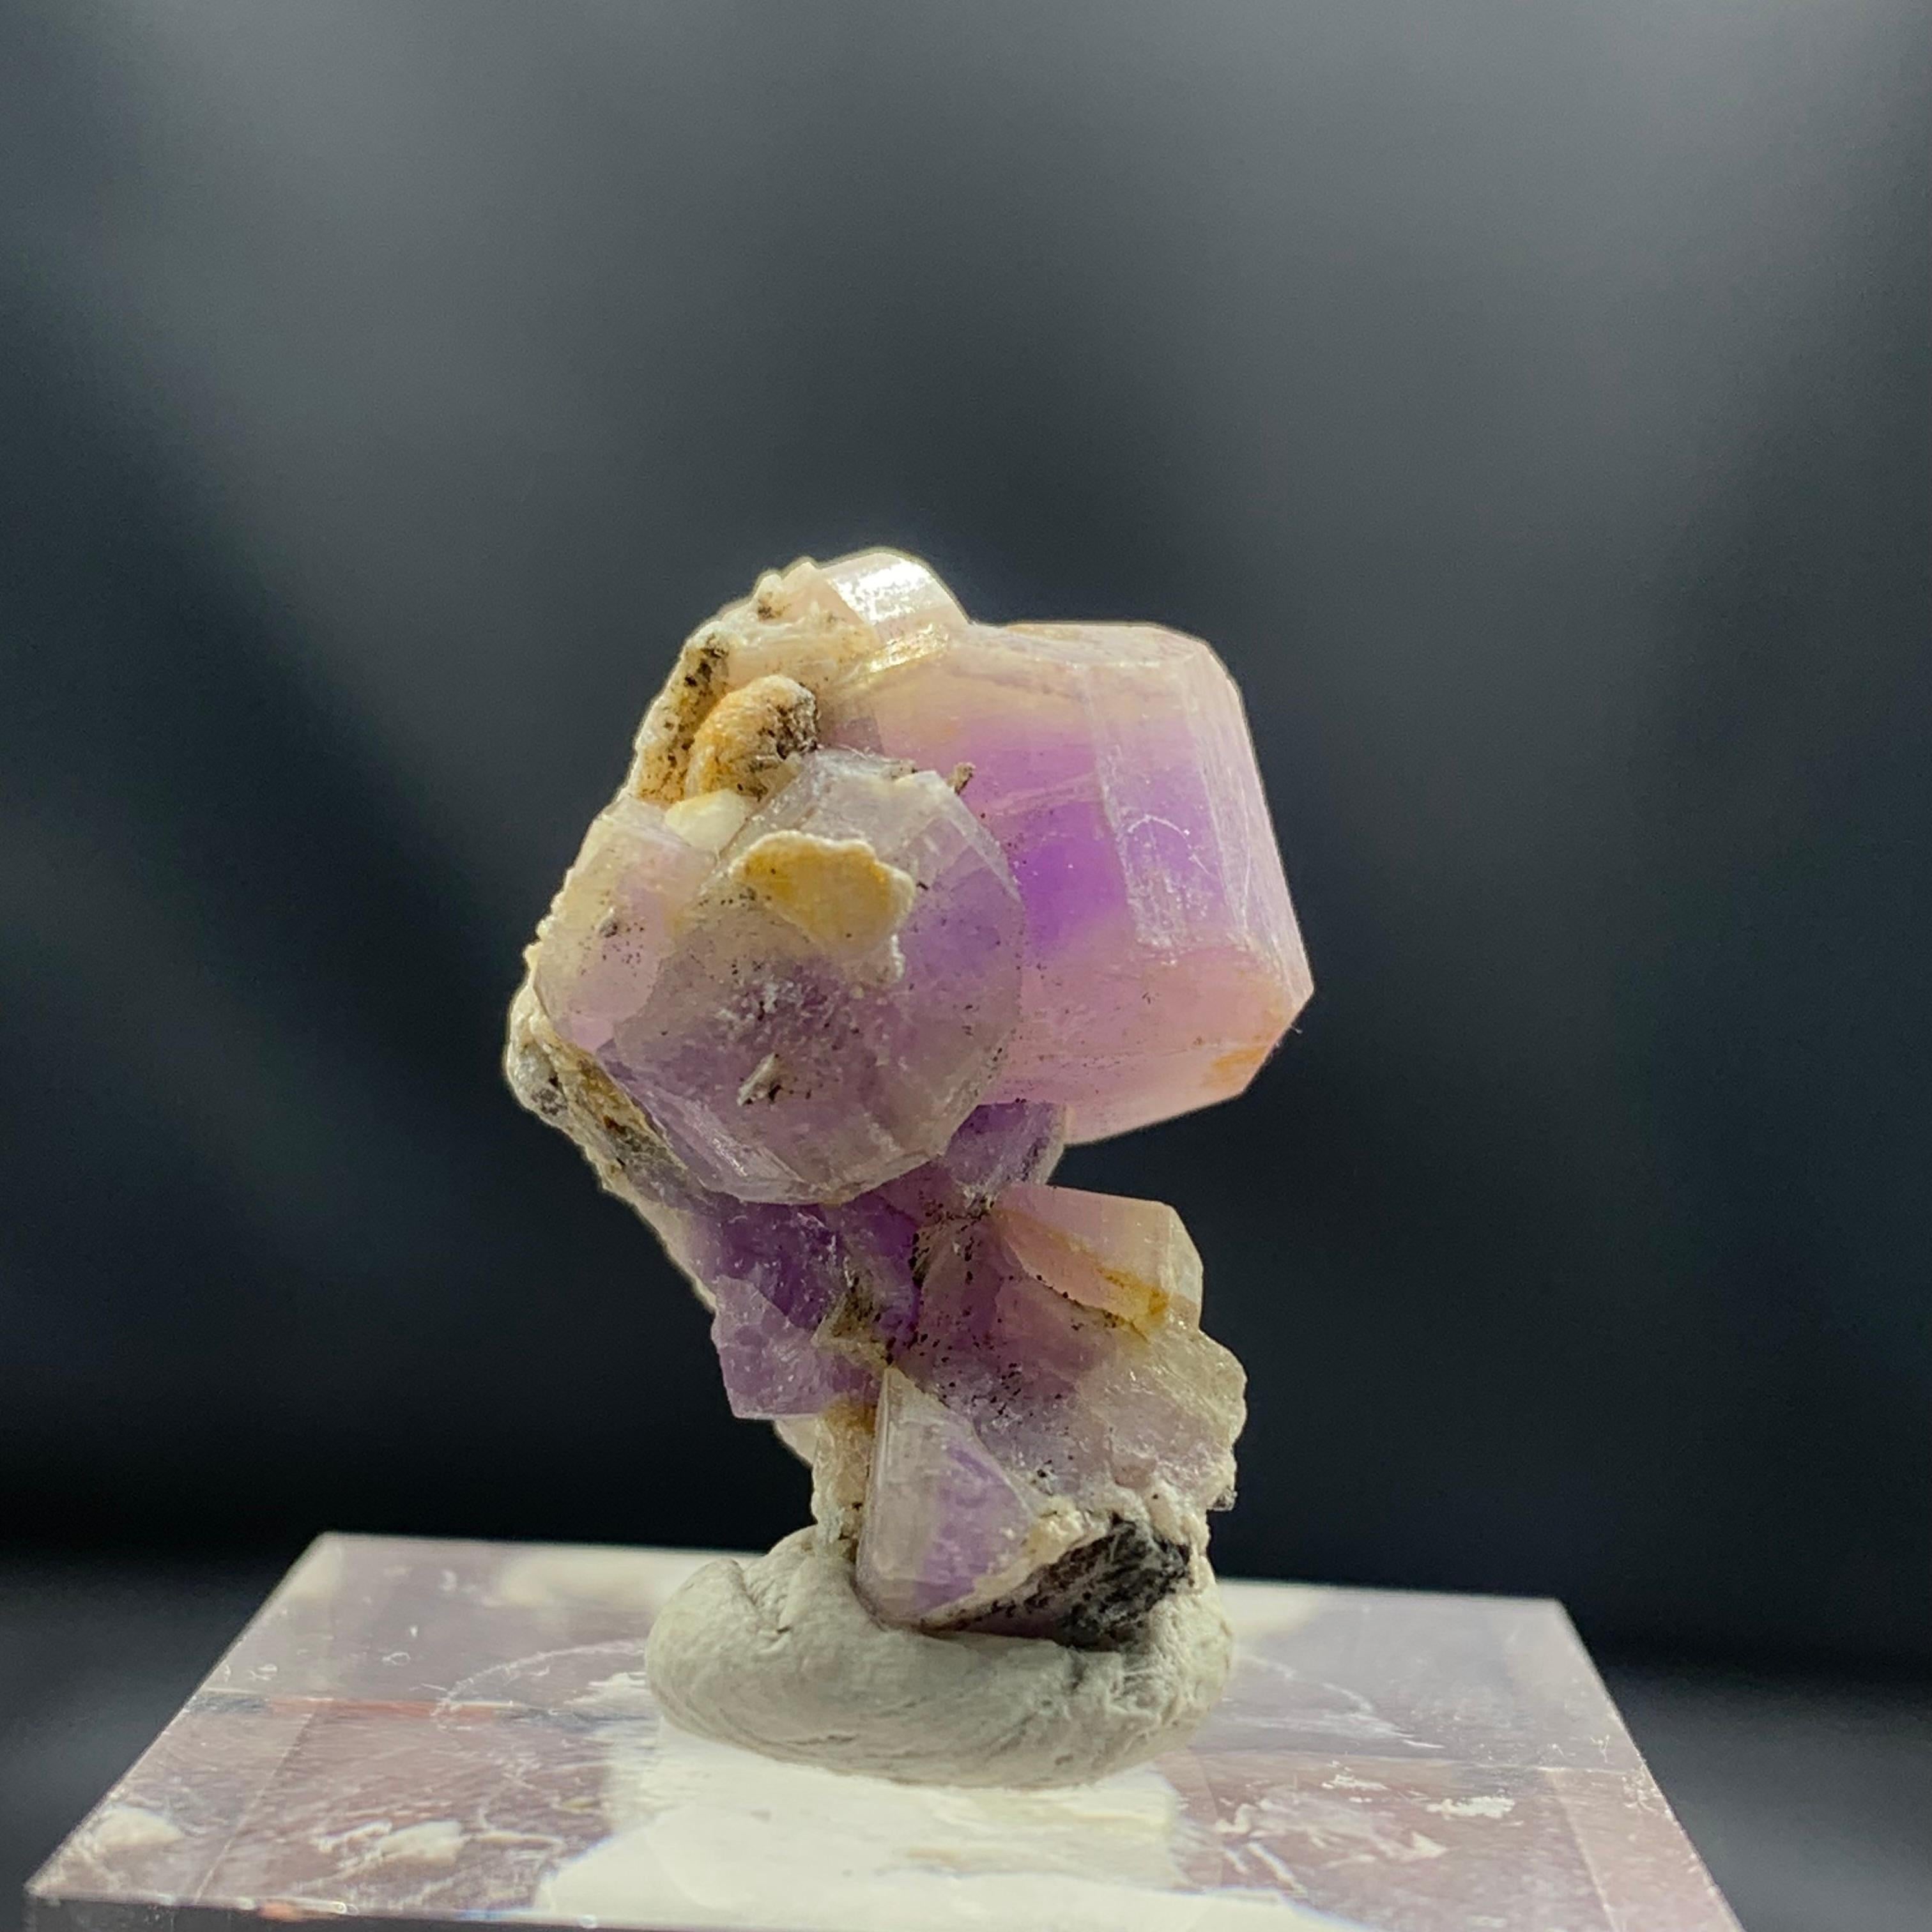 Natural lovely purple appetite bunch specimen from Pakistan
WEIGHT: 29.70 grams
DIMENSIONS: 2.4 x 1.7 x 1.4 Cm
ORIGIN : Pakistan
TREATMENT None

The Fluorite meaning comes from the Latin word for flux, referring to the gems ability to flow in flux